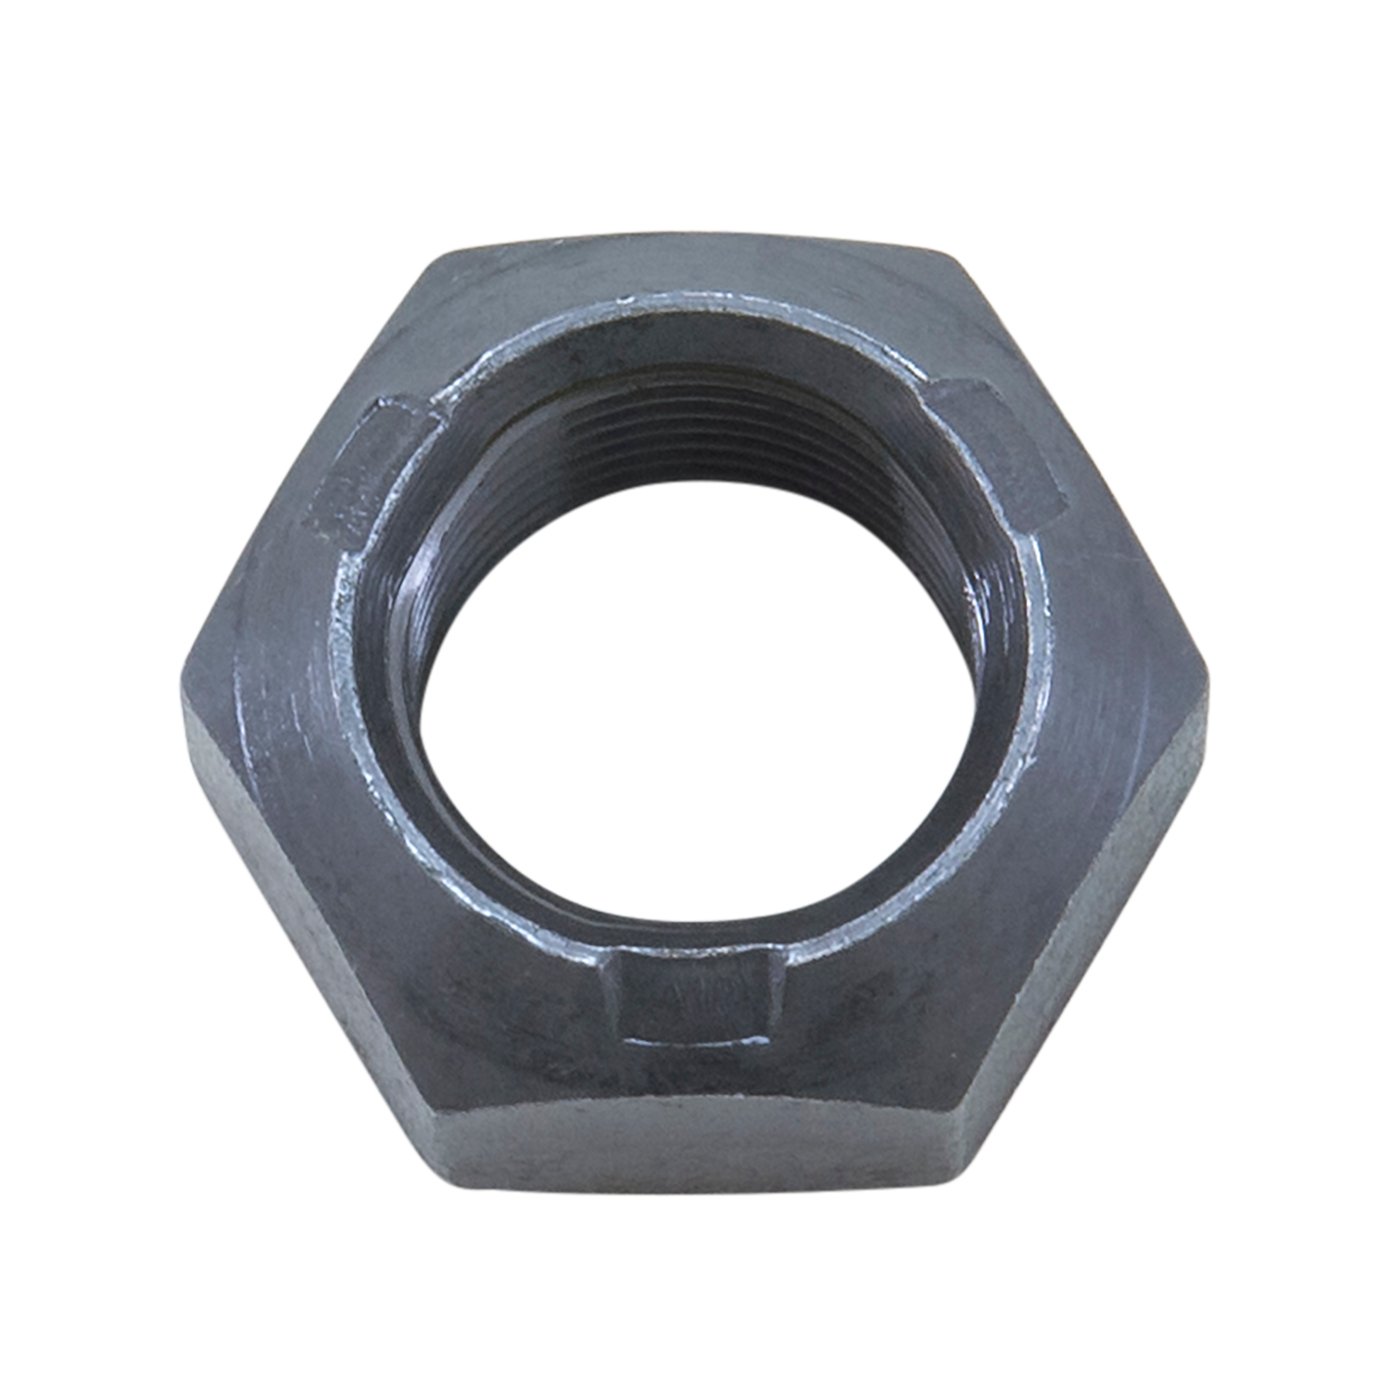 Replacement Pinion Nut For Dana 25, 27, 30,